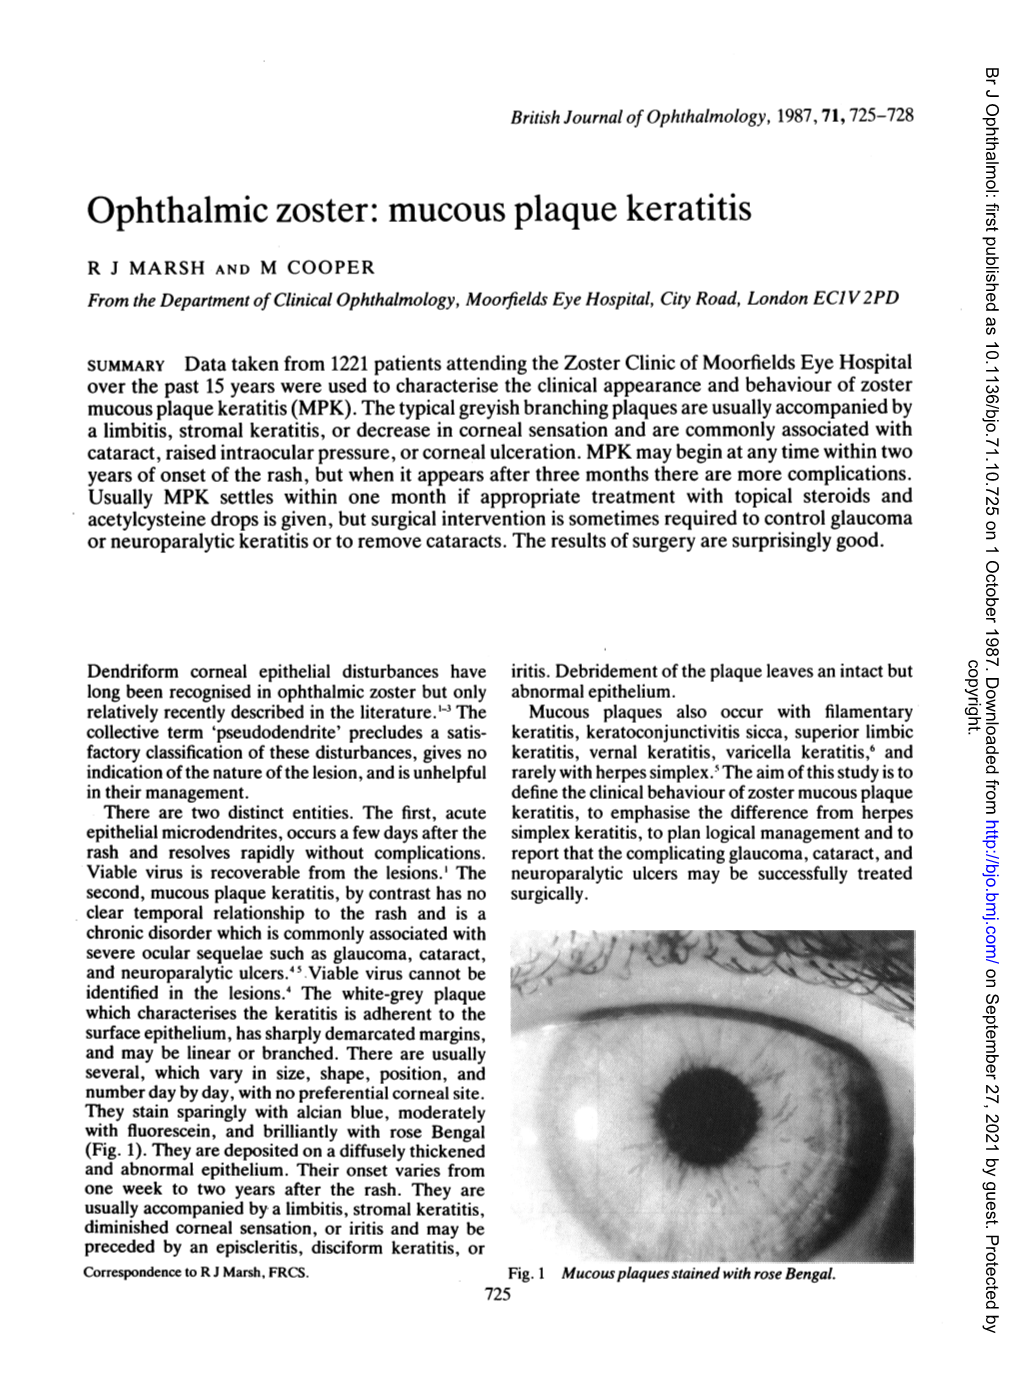 Ophthalmic Zoster: Mucous Plaque Keratitis